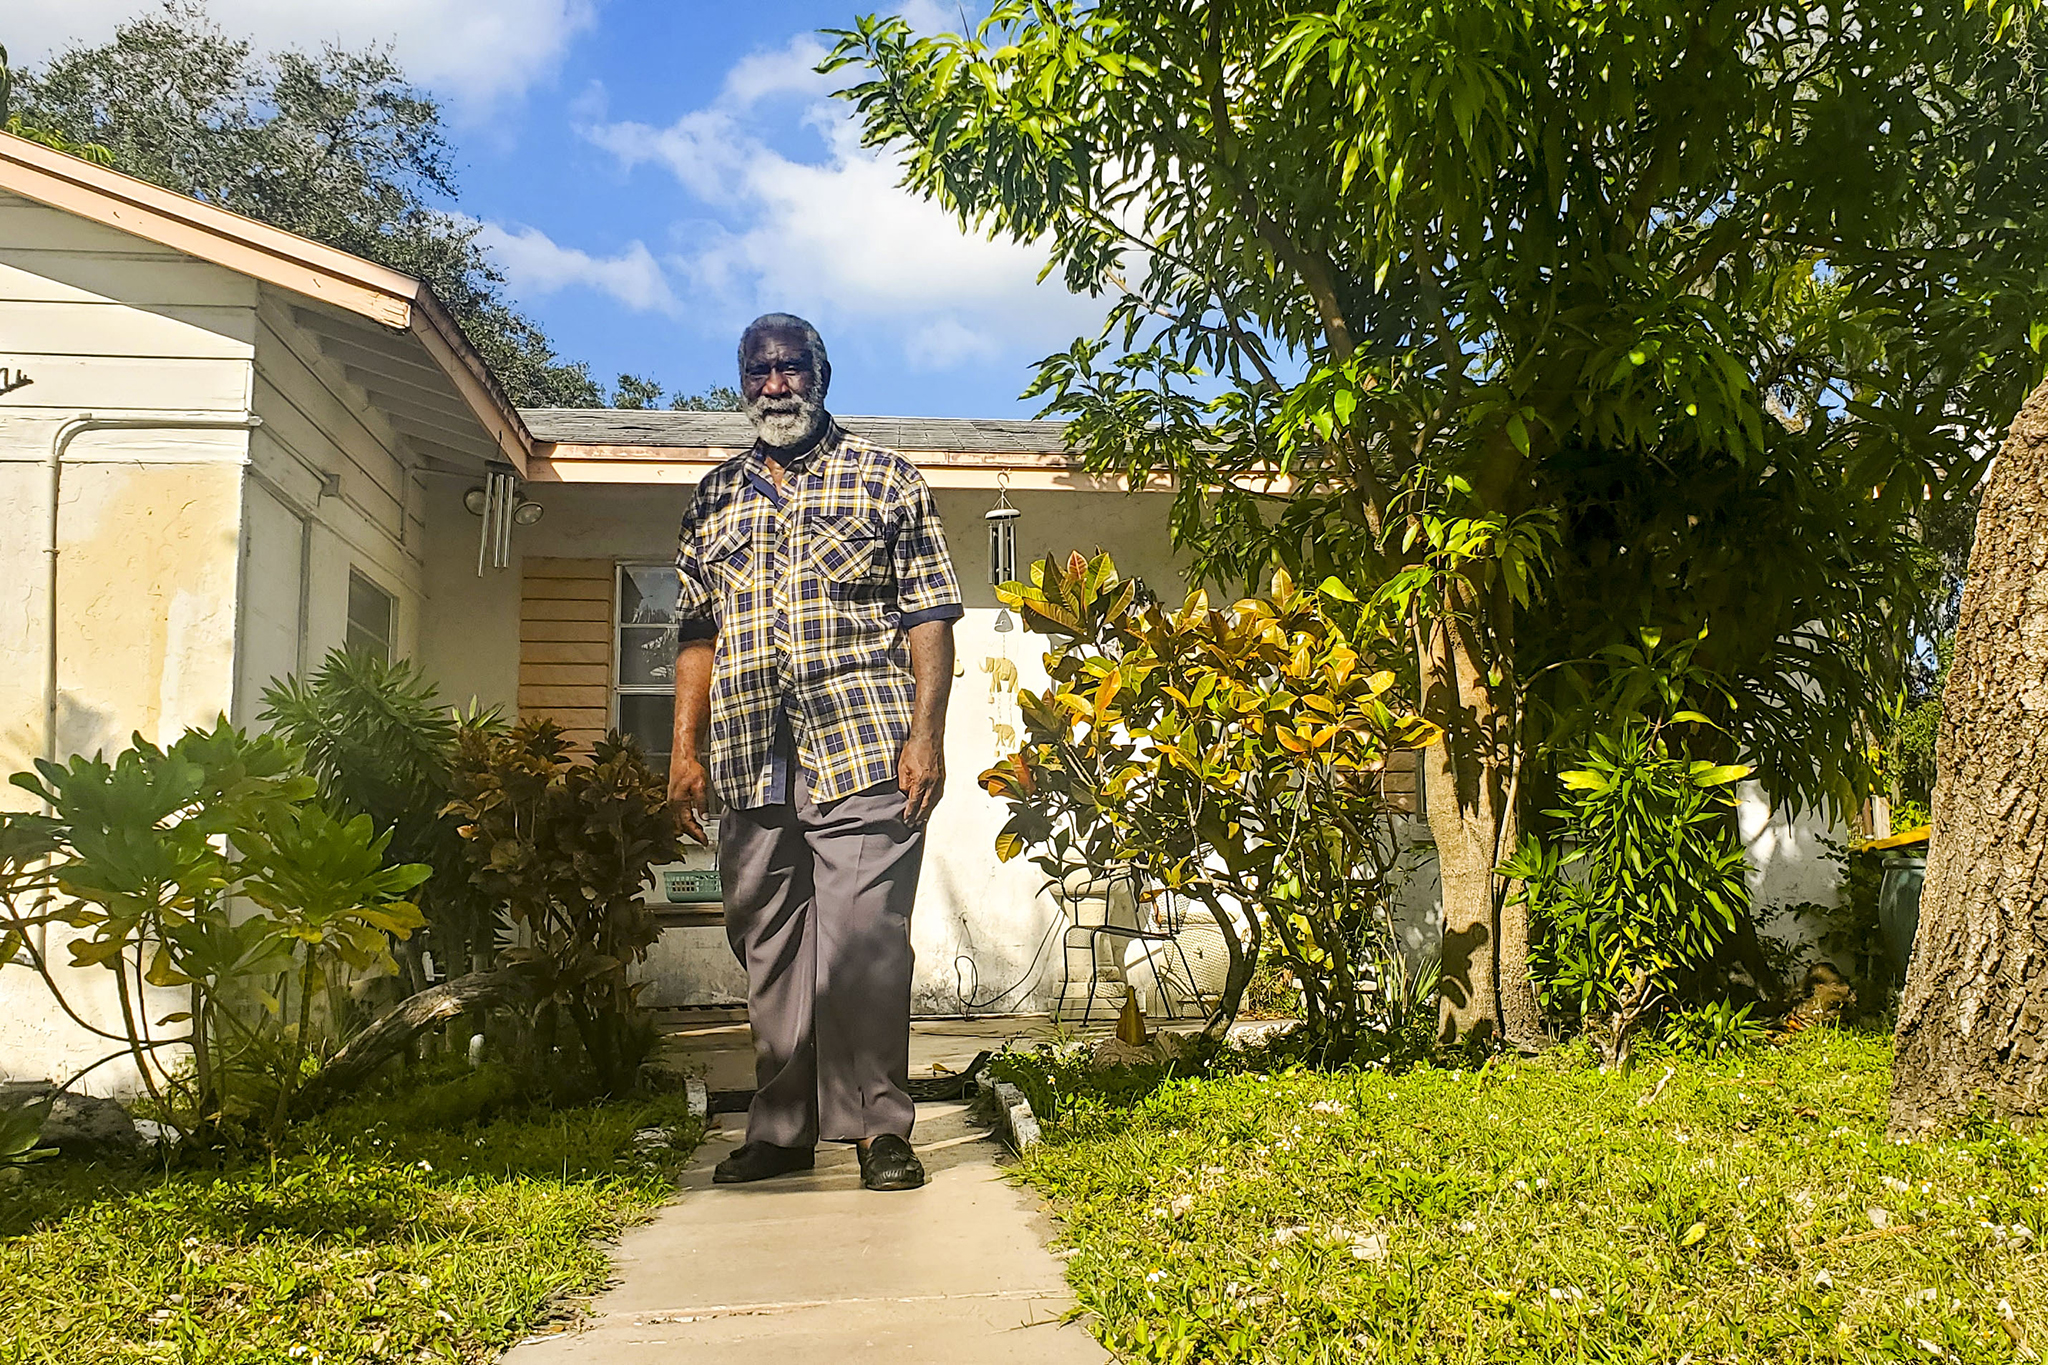 Fredd Atkins stands in front of his childhood home in Newtown. The house was built during the earliest phases of the neighborhood, and was one of the first concrete structures in the area, according to Atkins. His family still owns and rents out the house to members of the community. January 2, 2023.